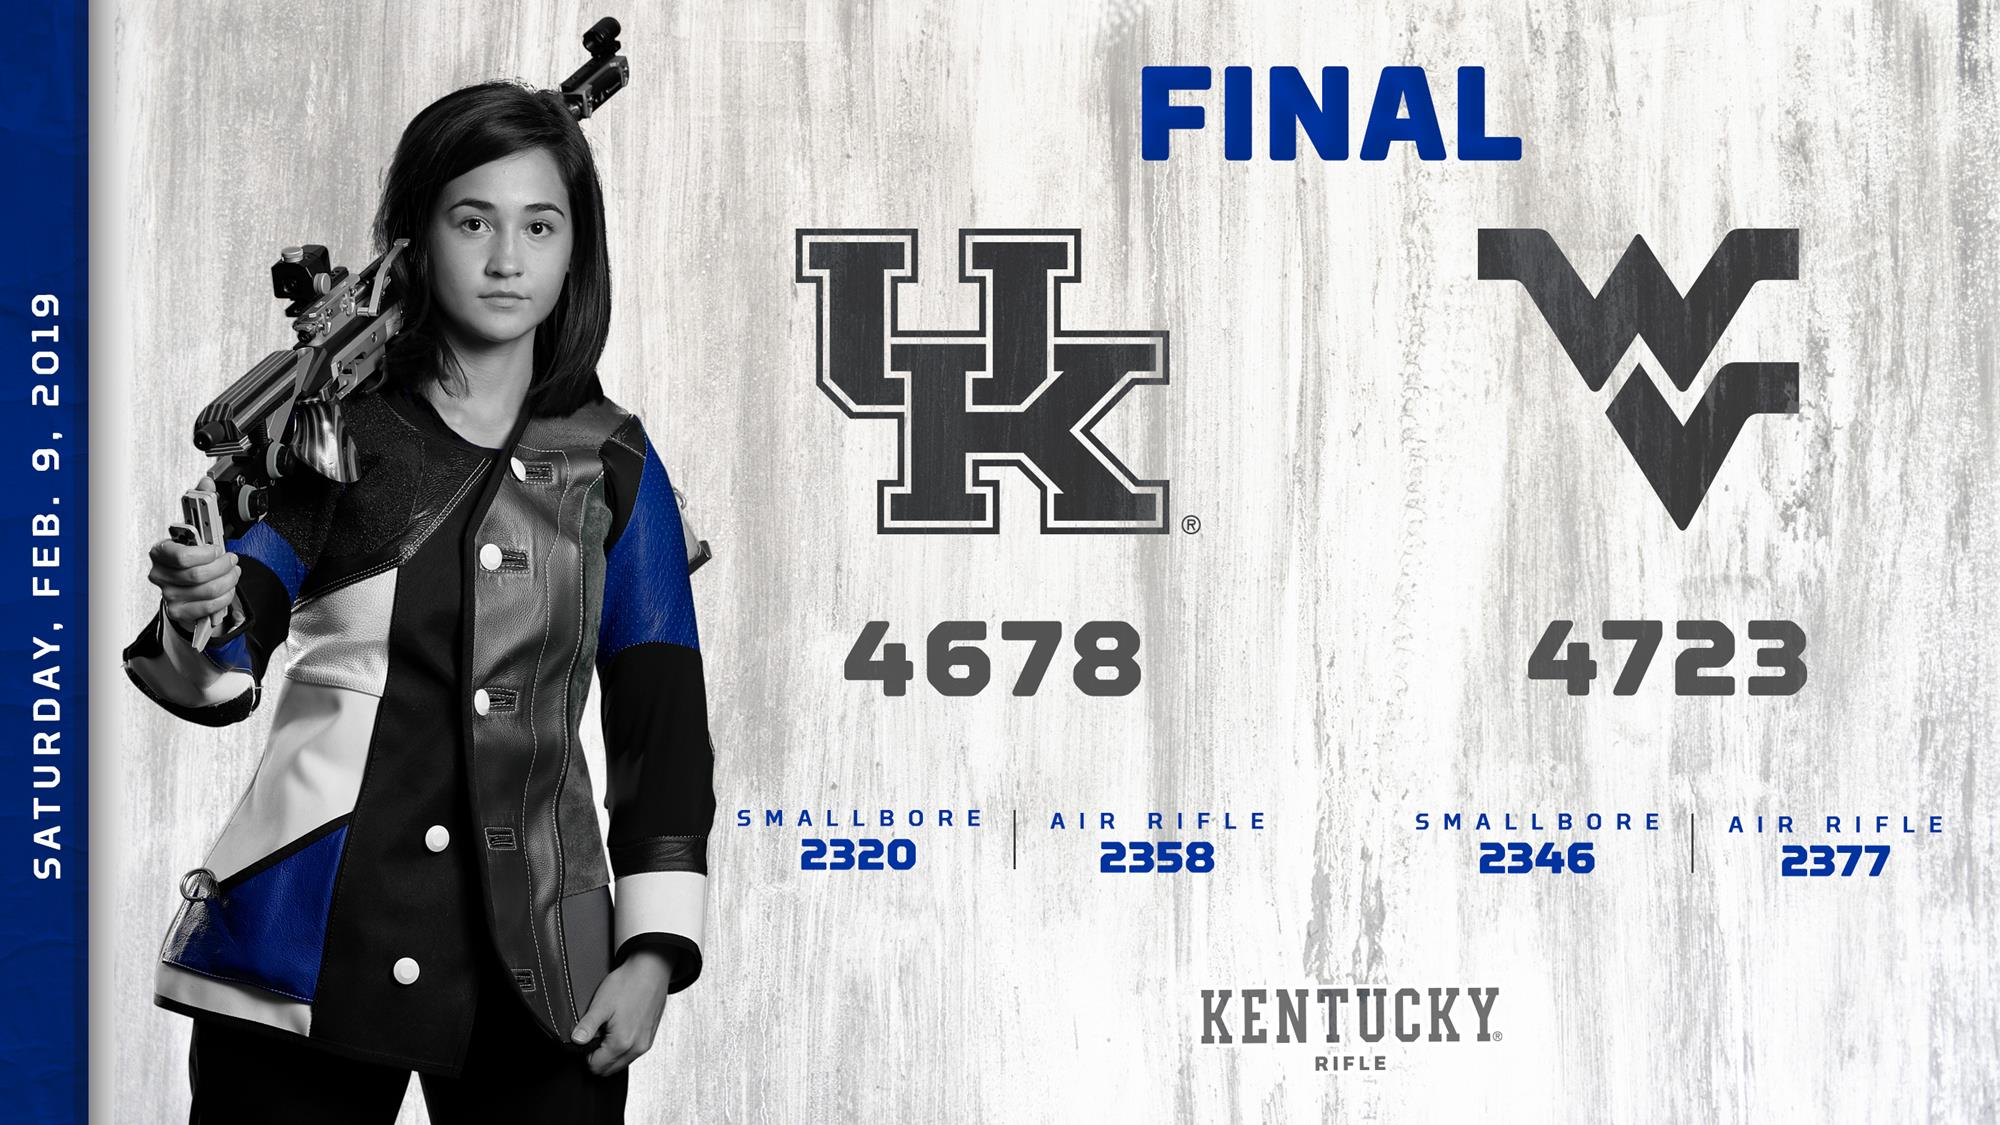 UK Drops First Match of 2018-19 with 4678 vs. WVU